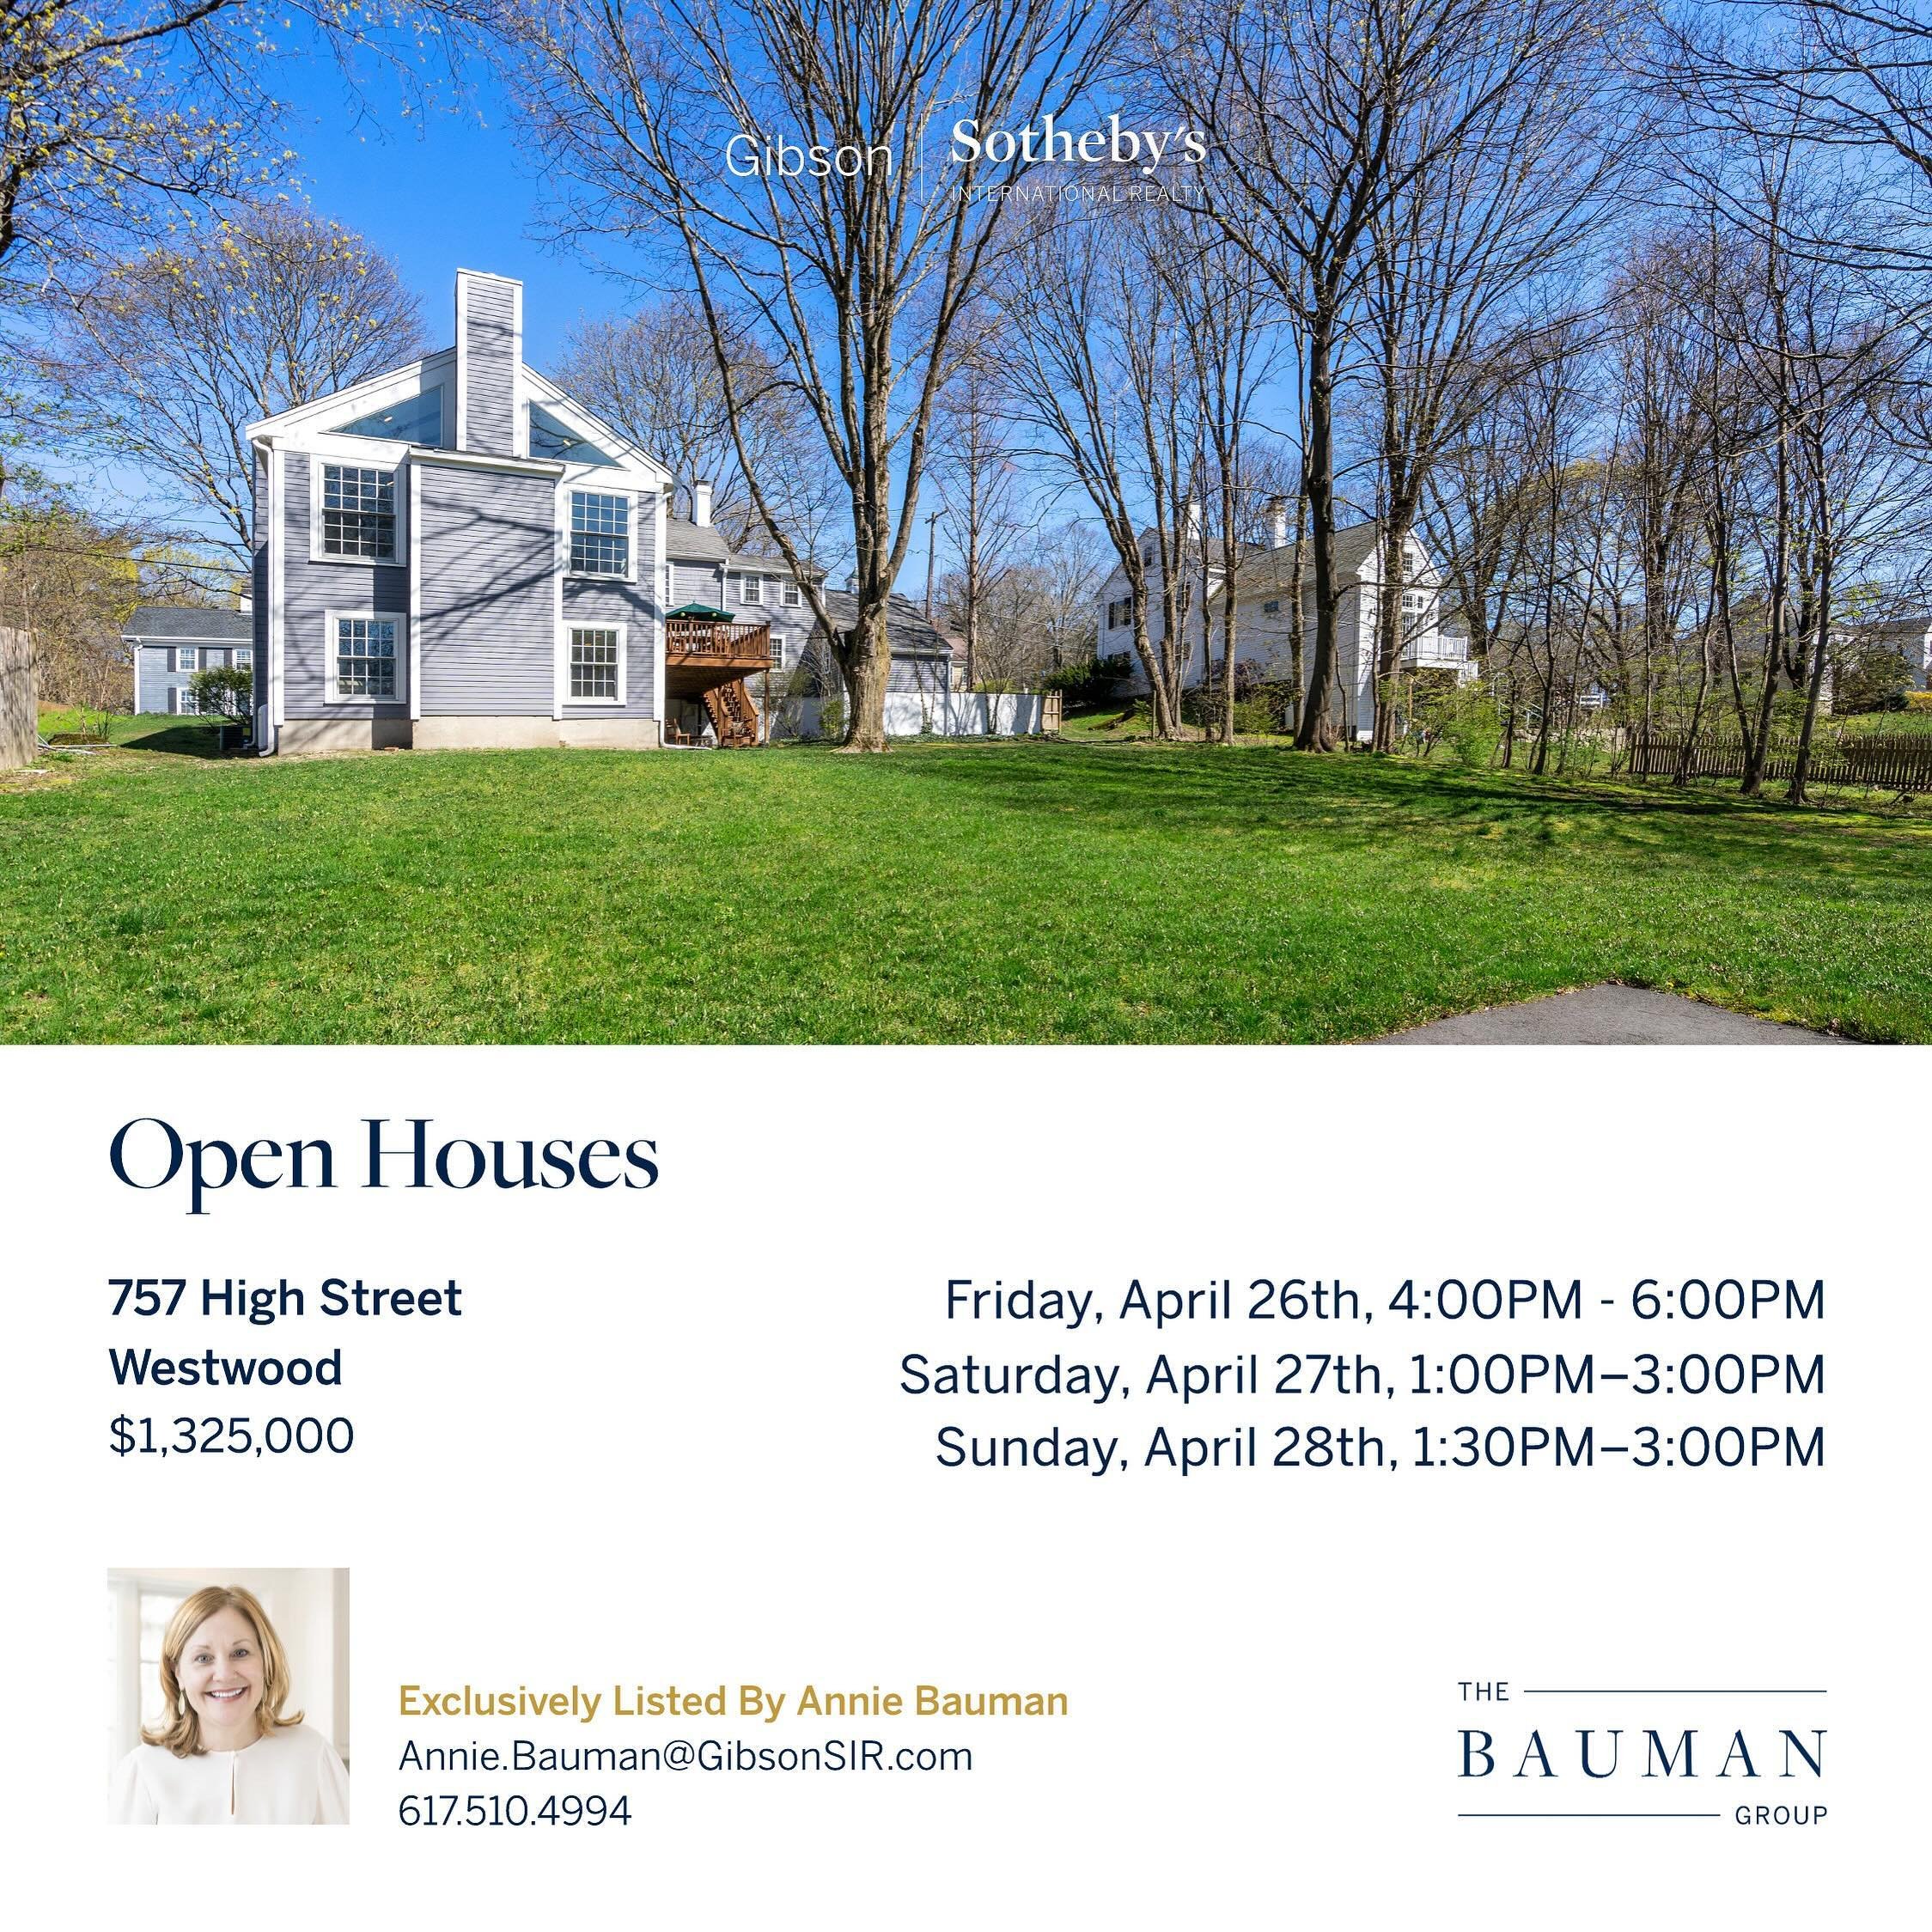 OPEN HOUSES begin NOW. 757 High Street Westwood is for families, downsizers, rightsizers and everyone in between. A rare offering in a housing market starved for interesting, functional, move-in ready homes. #thebaumangroup #gibsonsothebysinternation